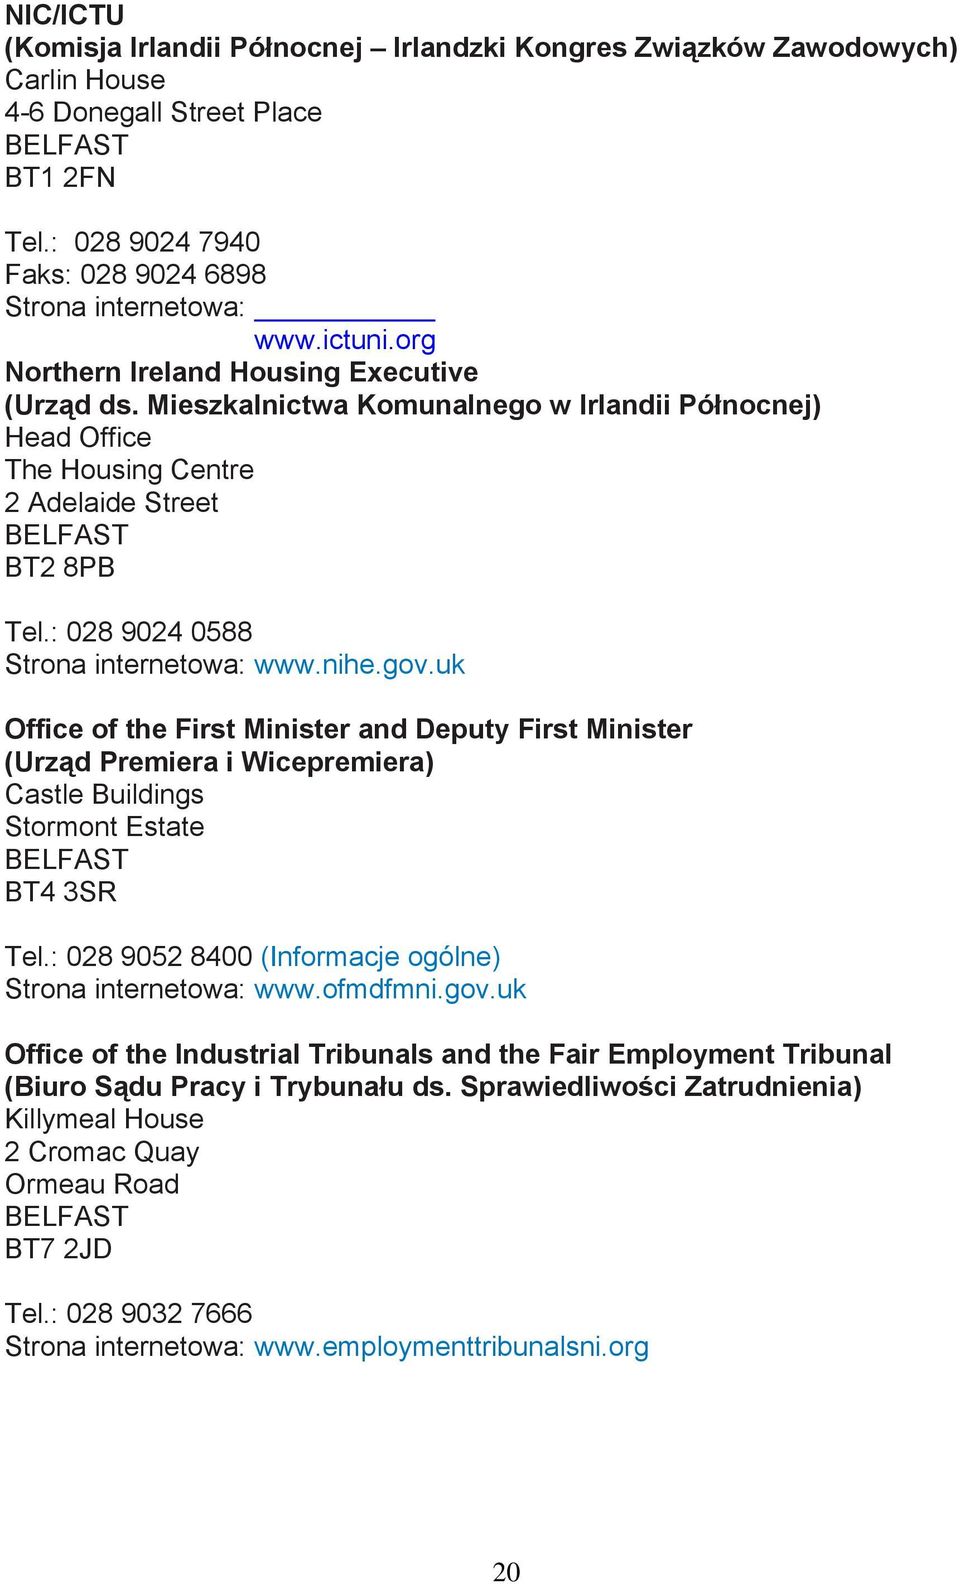 nihe.gov.uk Office of the First Minister and Deputy First Minister (Urząd Premiera i Wicepremiera) Castle Buildings Stormont Estate BT4 3SR Tel.